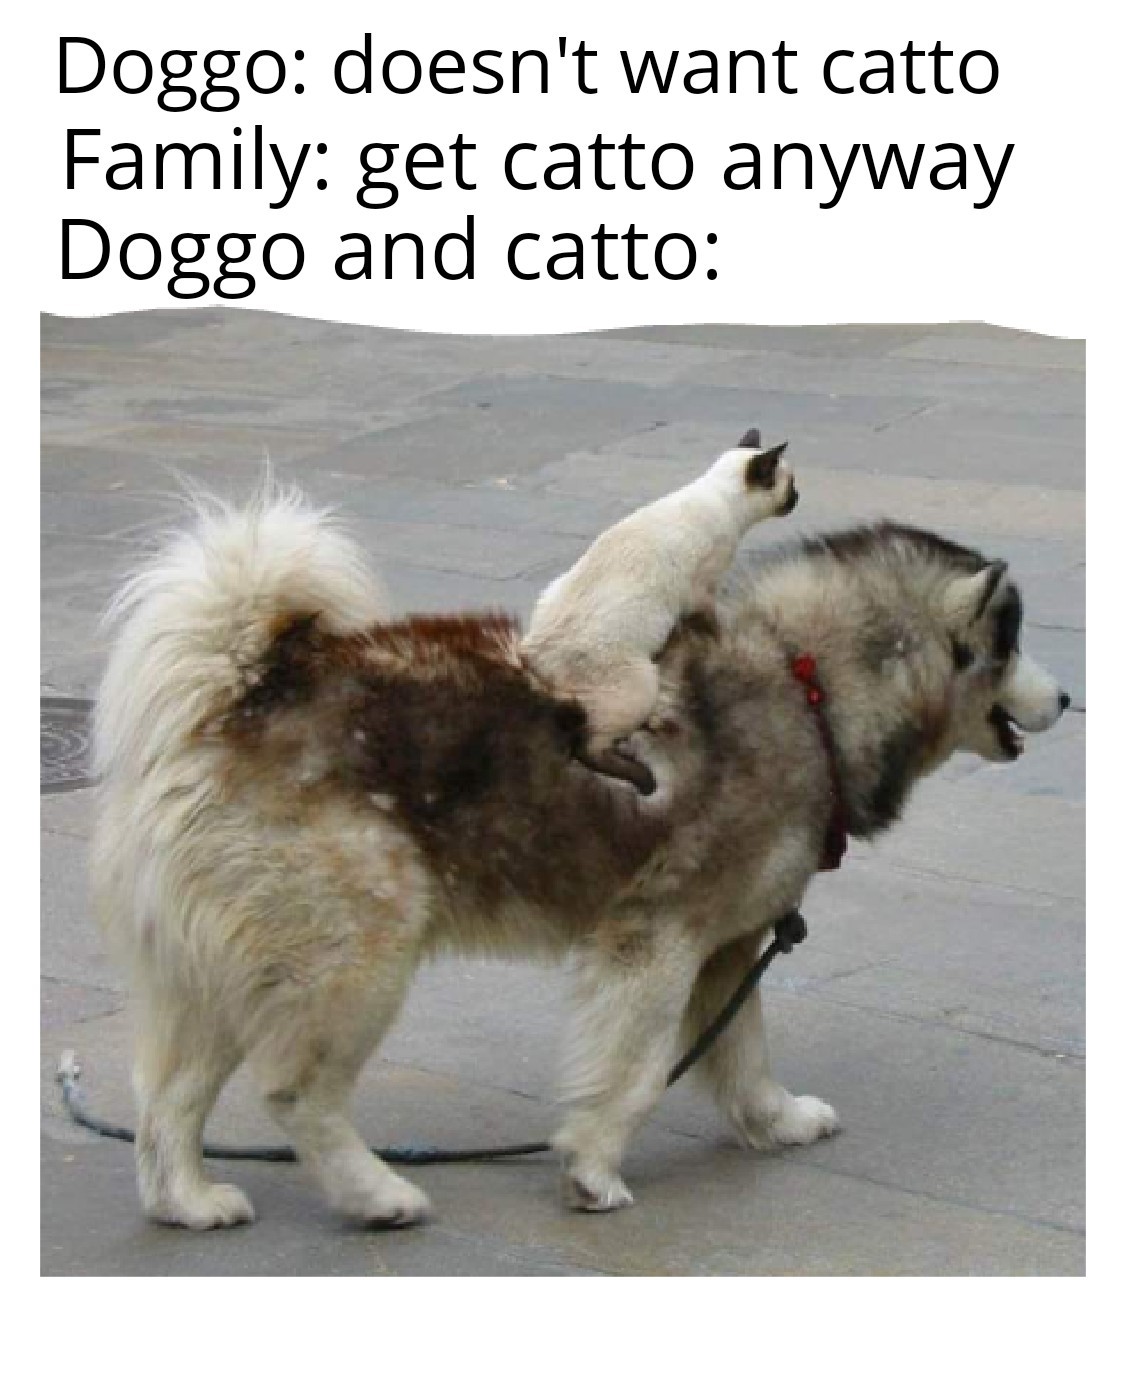 cat riding dog - Doggo doesn't want catto Family get catto anyway Doggo and catto